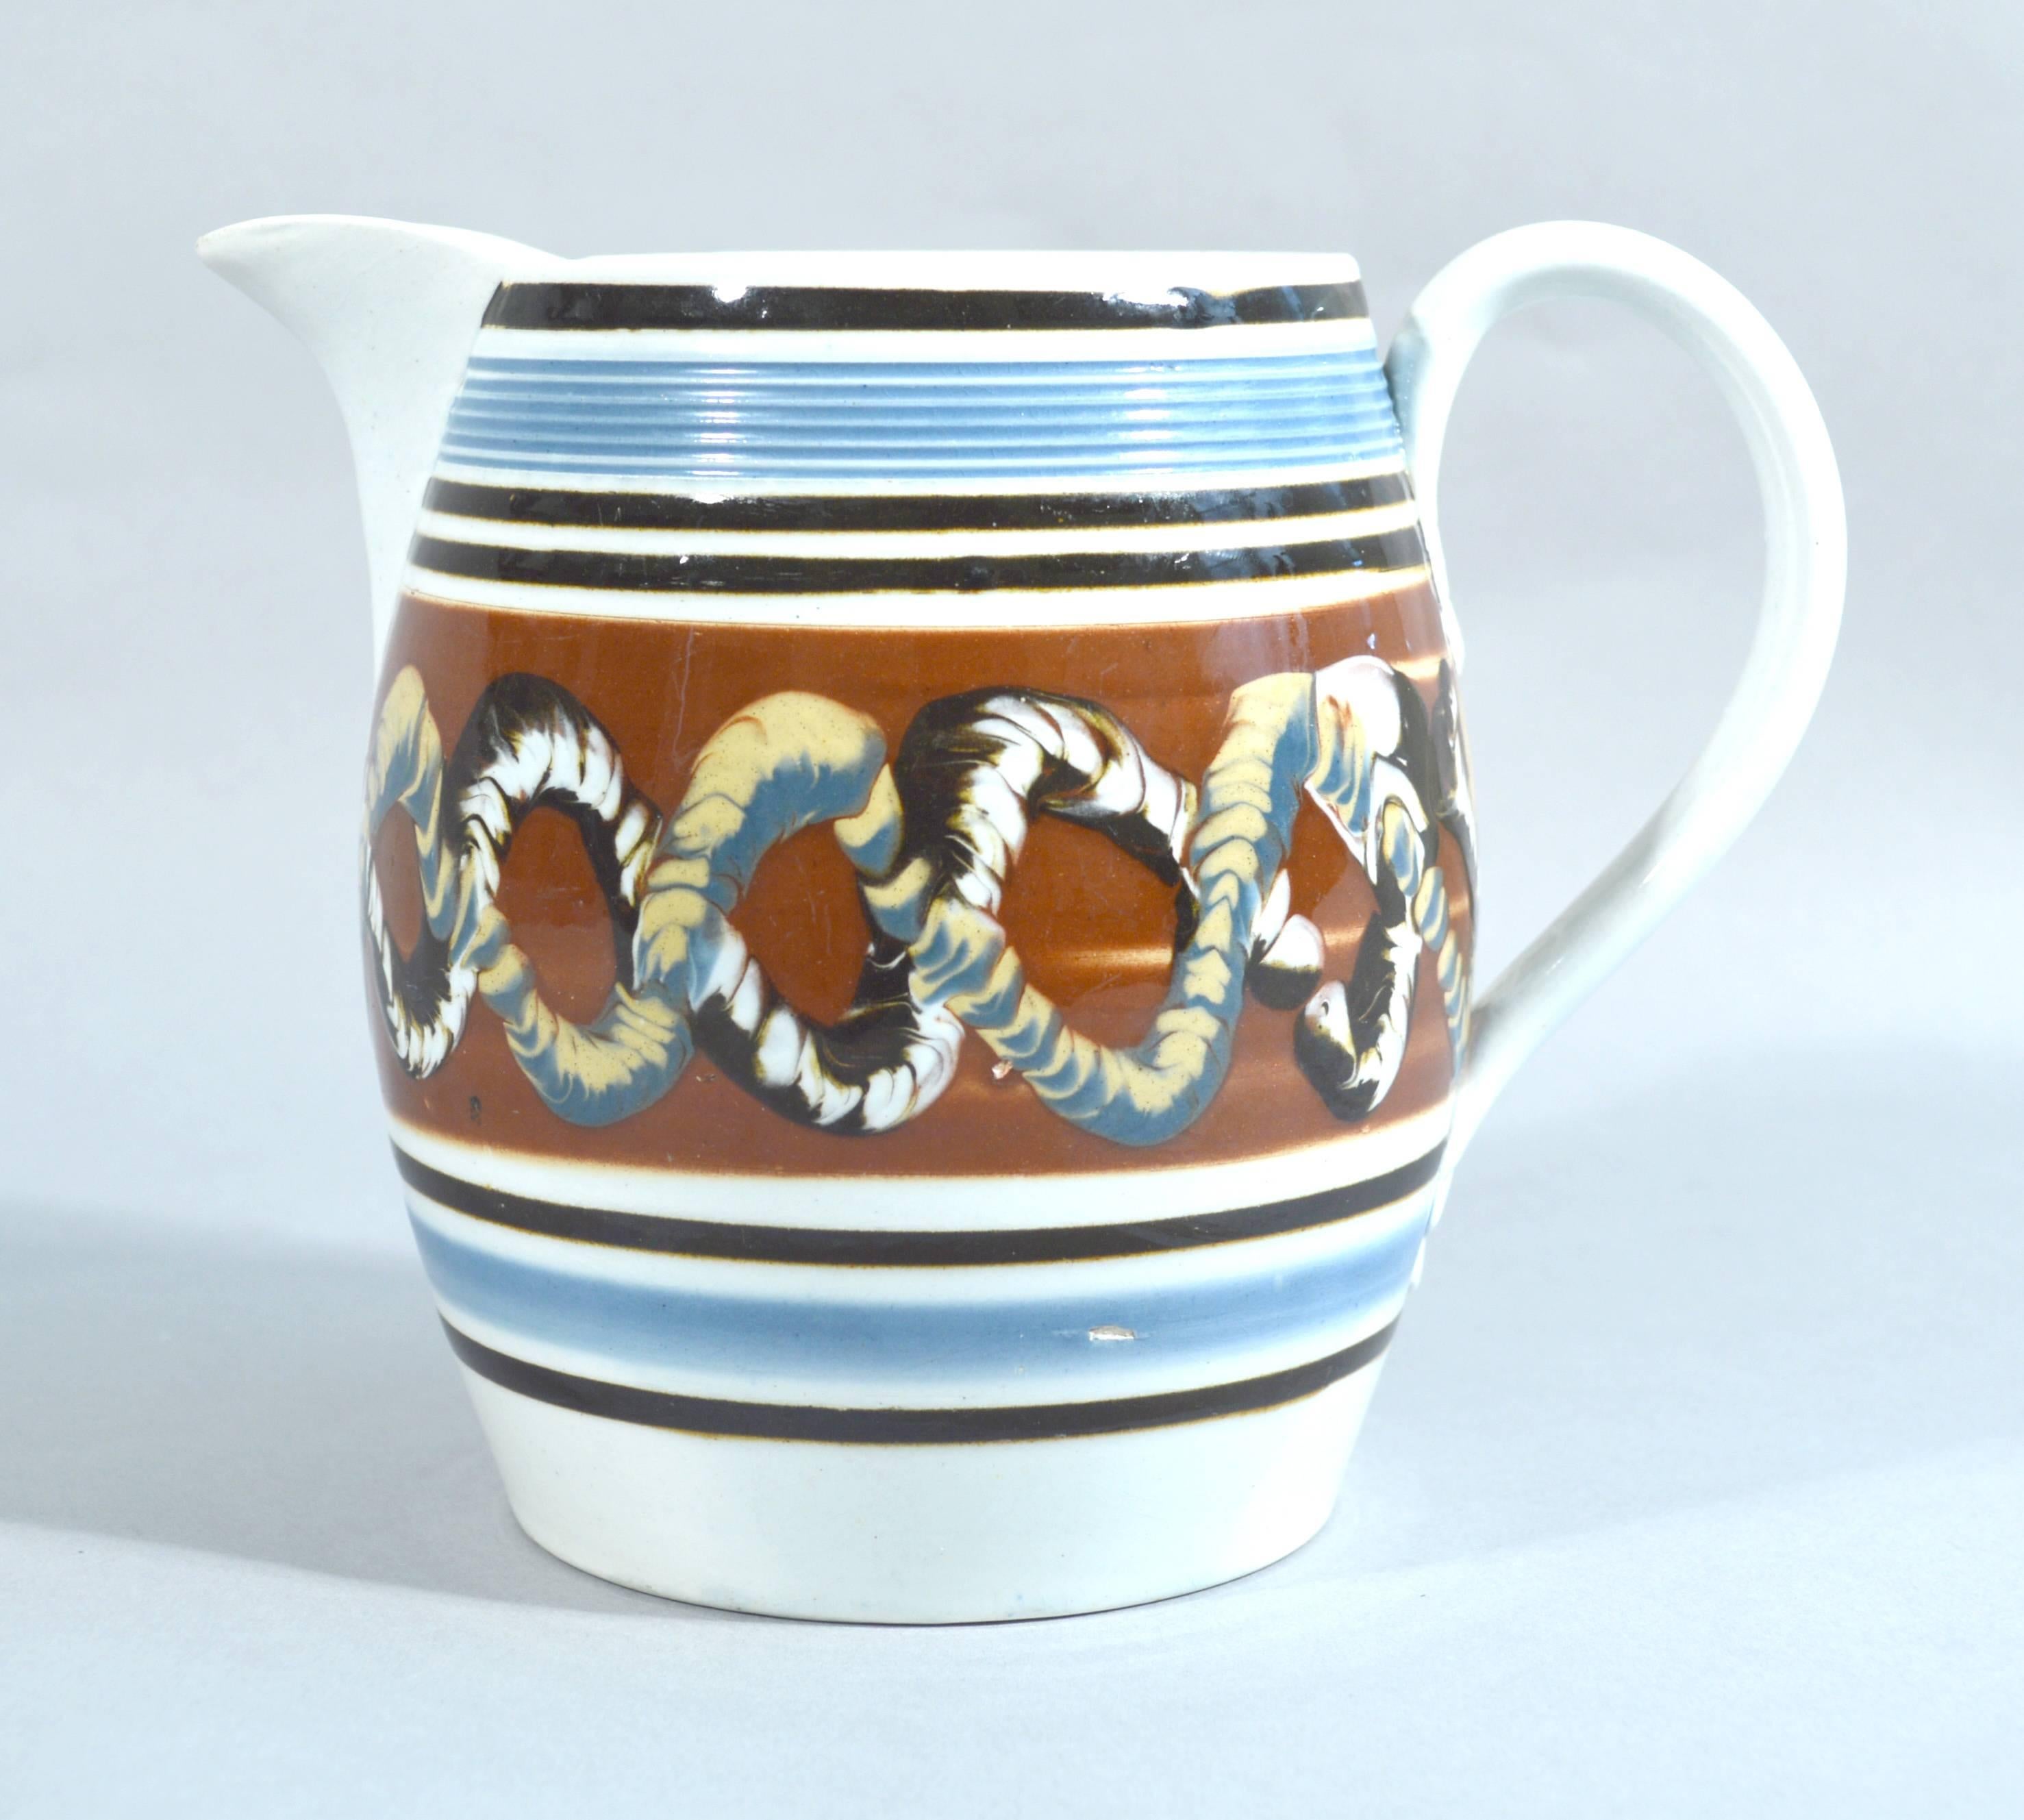 Mocha pearlware jug with double earthworm design,
circa 1800-1830.

The mocha pearlware jug or pitcher is decorated with a double-earthworm design on a central brown panel. To the top is a molded reeded band in a sky blue and below a narrower